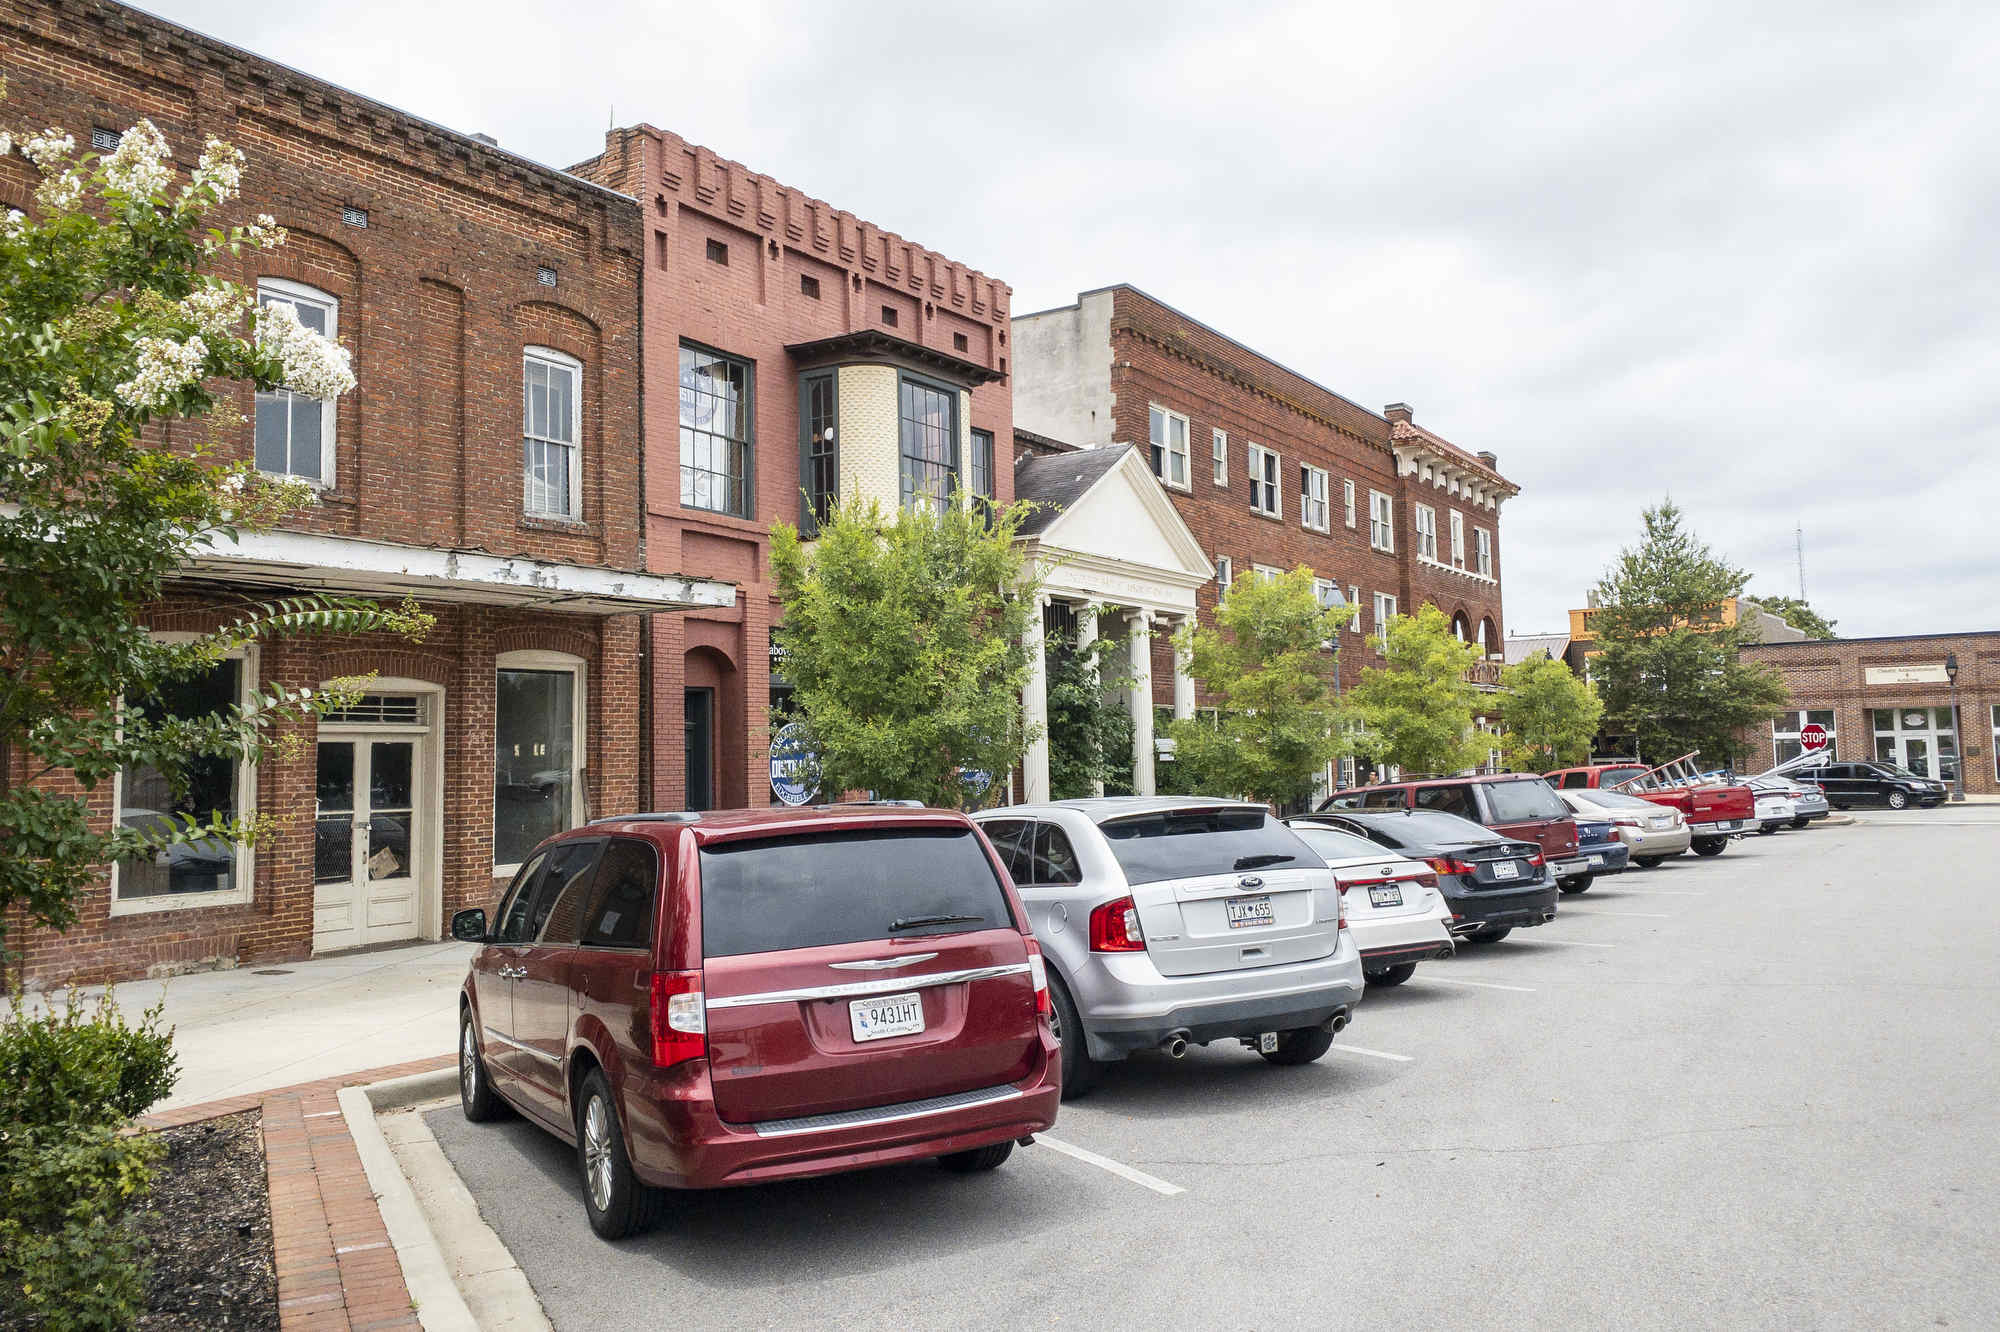 Cars parked in front of brick buildings in downtown Edgefield, South Carolina.